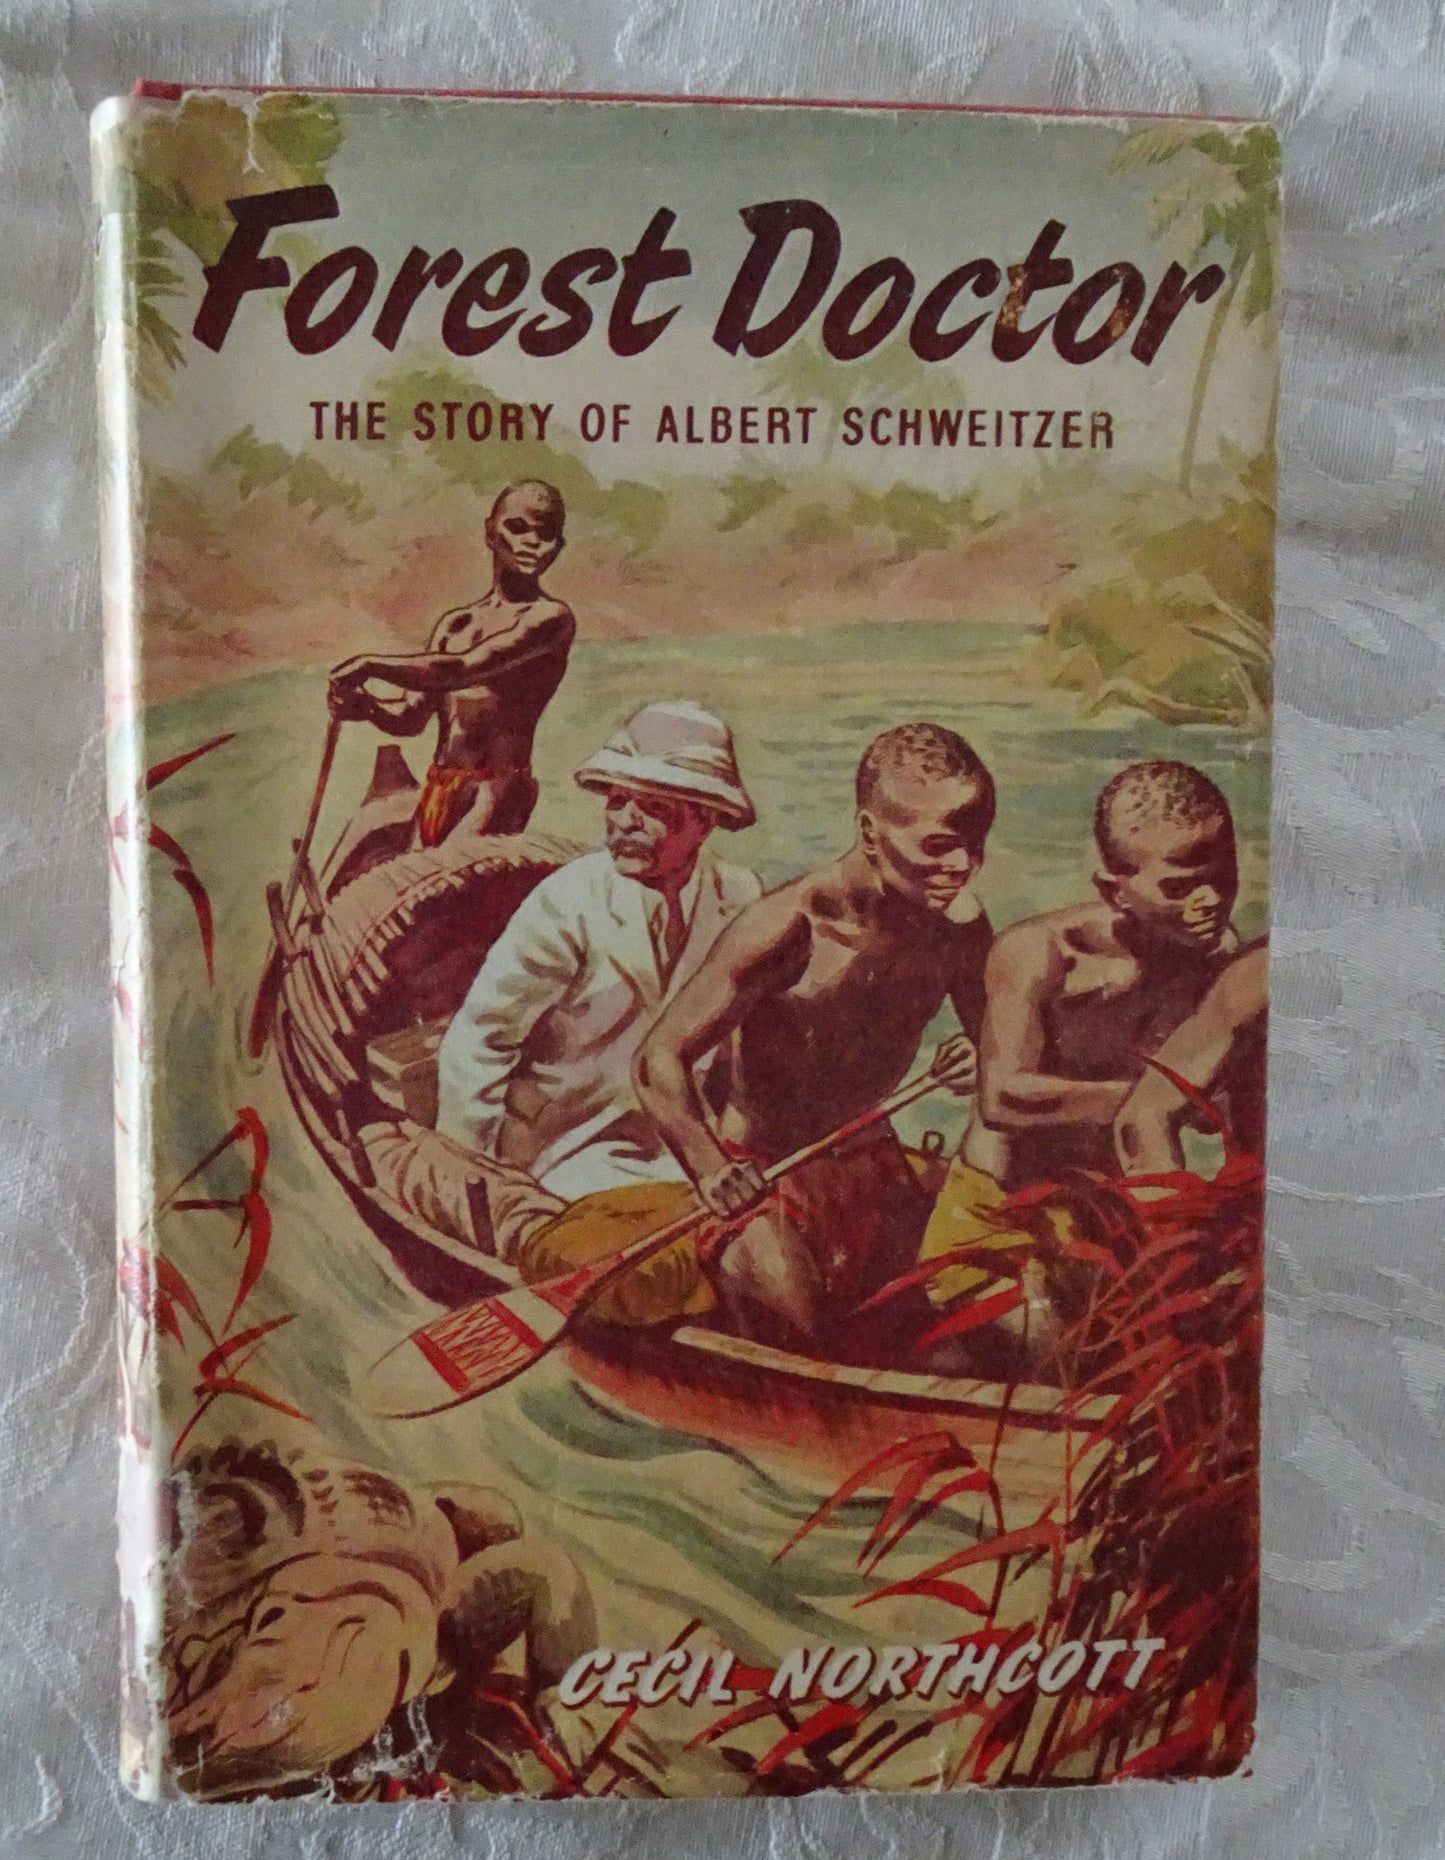 Forest Doctor by Cecil Northcott